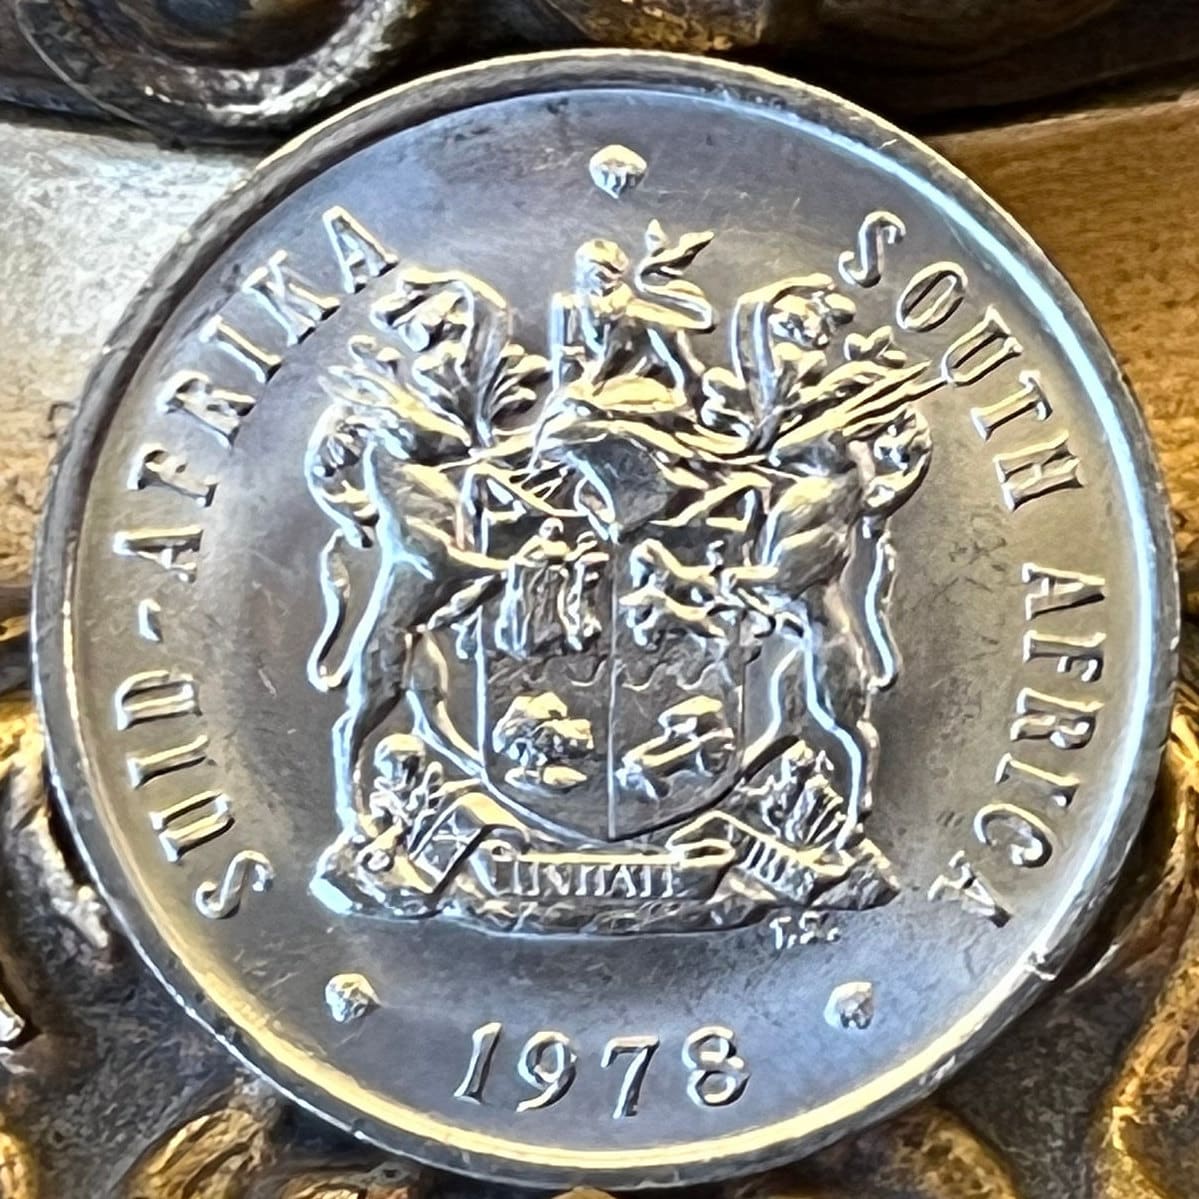 King Sugar Bush 20 Cents South Africa Authentic Coin Money for Jewelry and Craft Making (King Protea) (Power Through Unity)